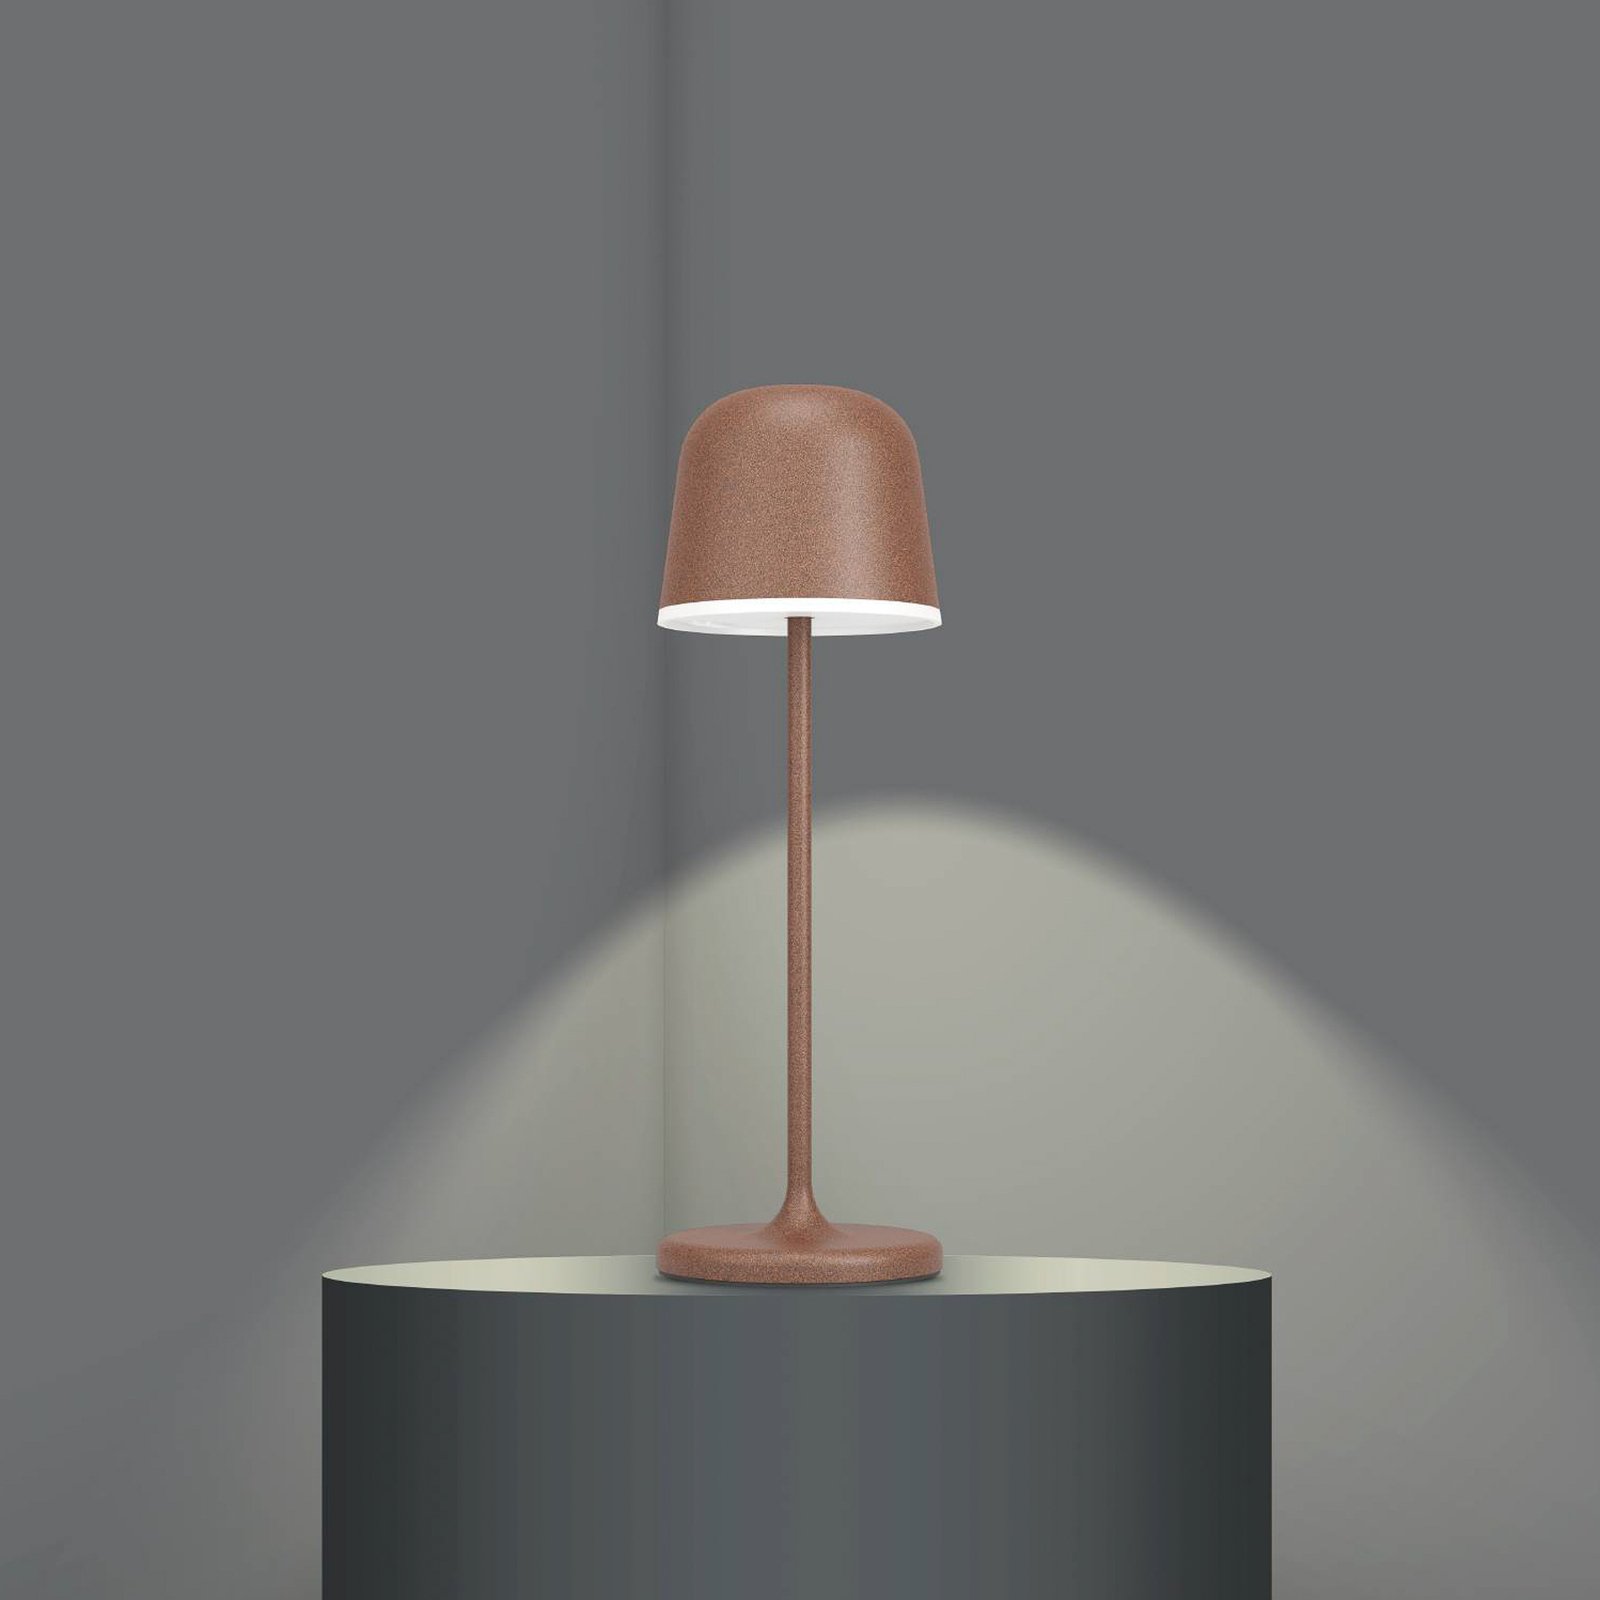 Mannera LED table lamp with a battery, rusty brown